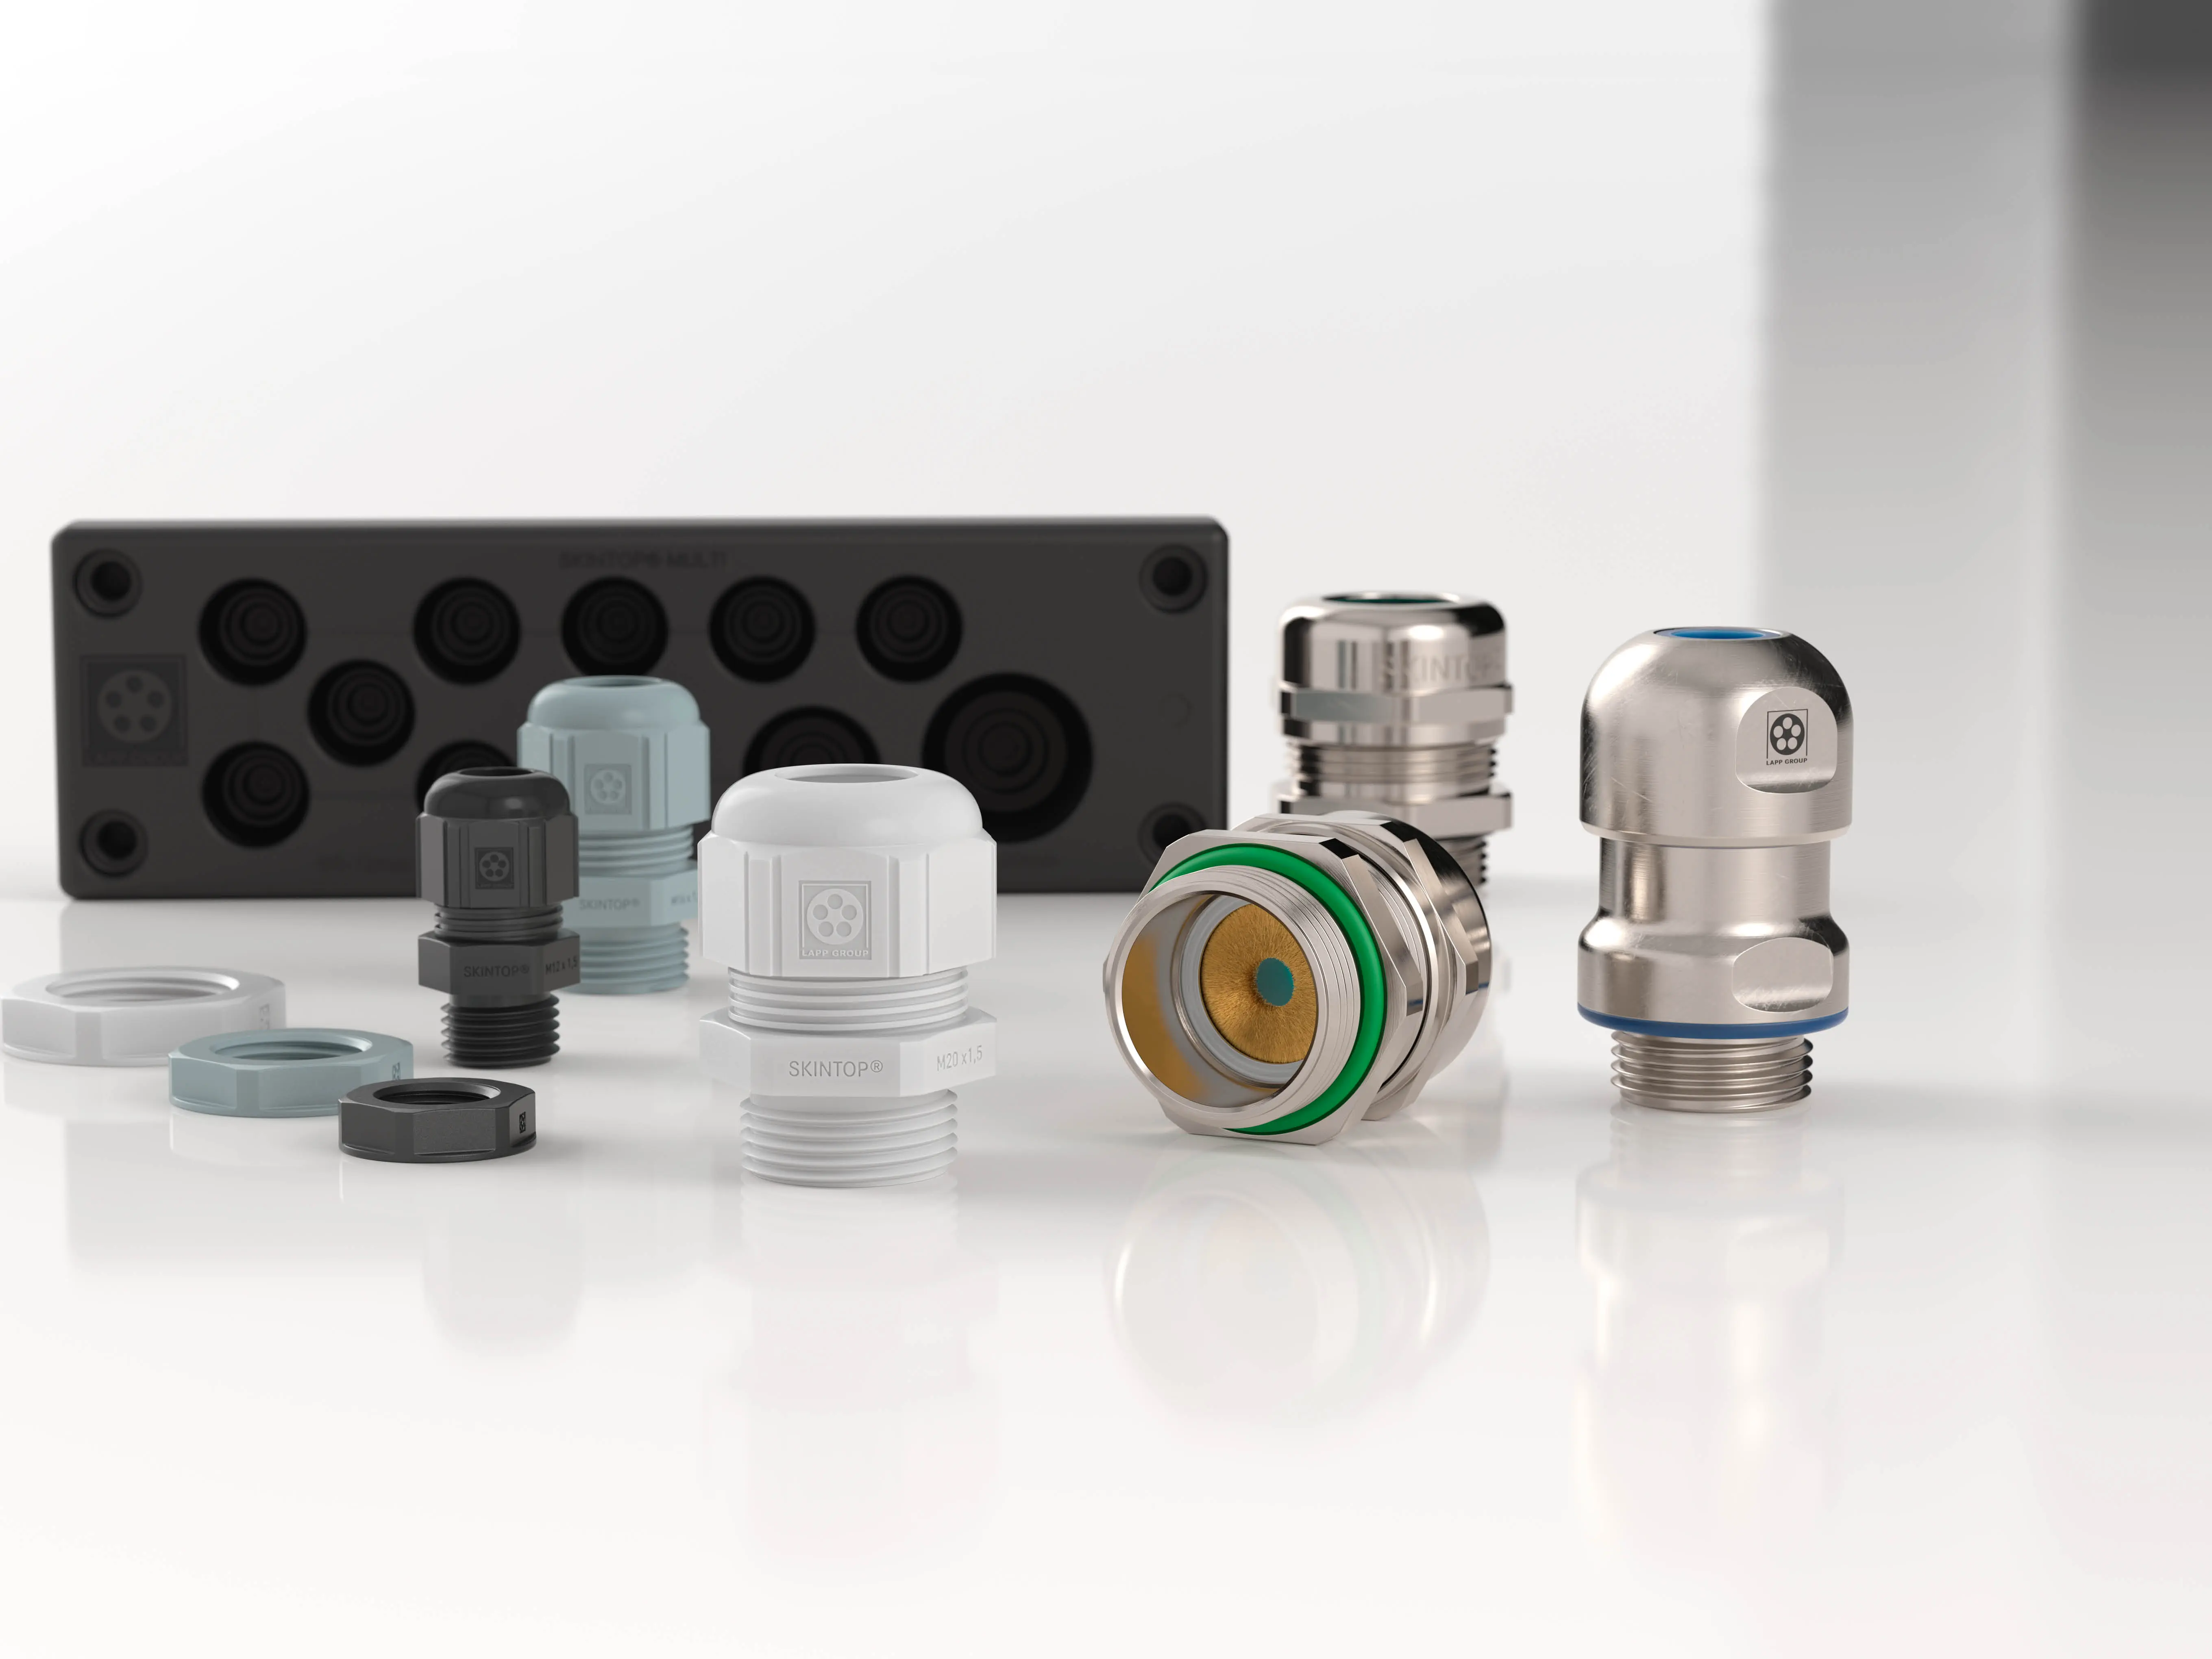 SKINTOP® cable glands from LAPP